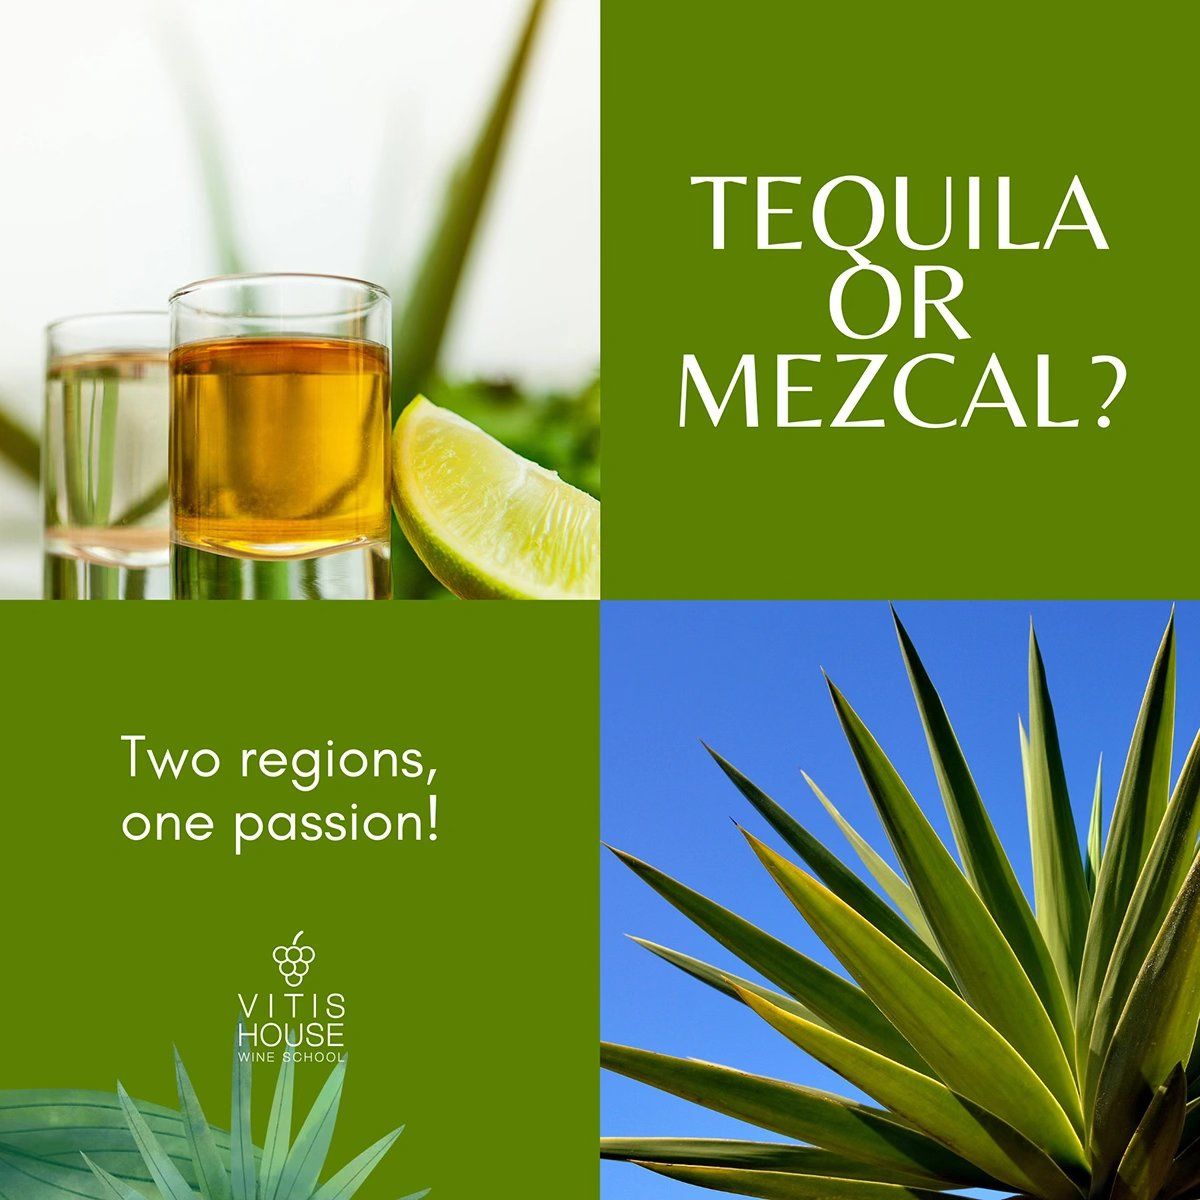 Tequila or Mezcal